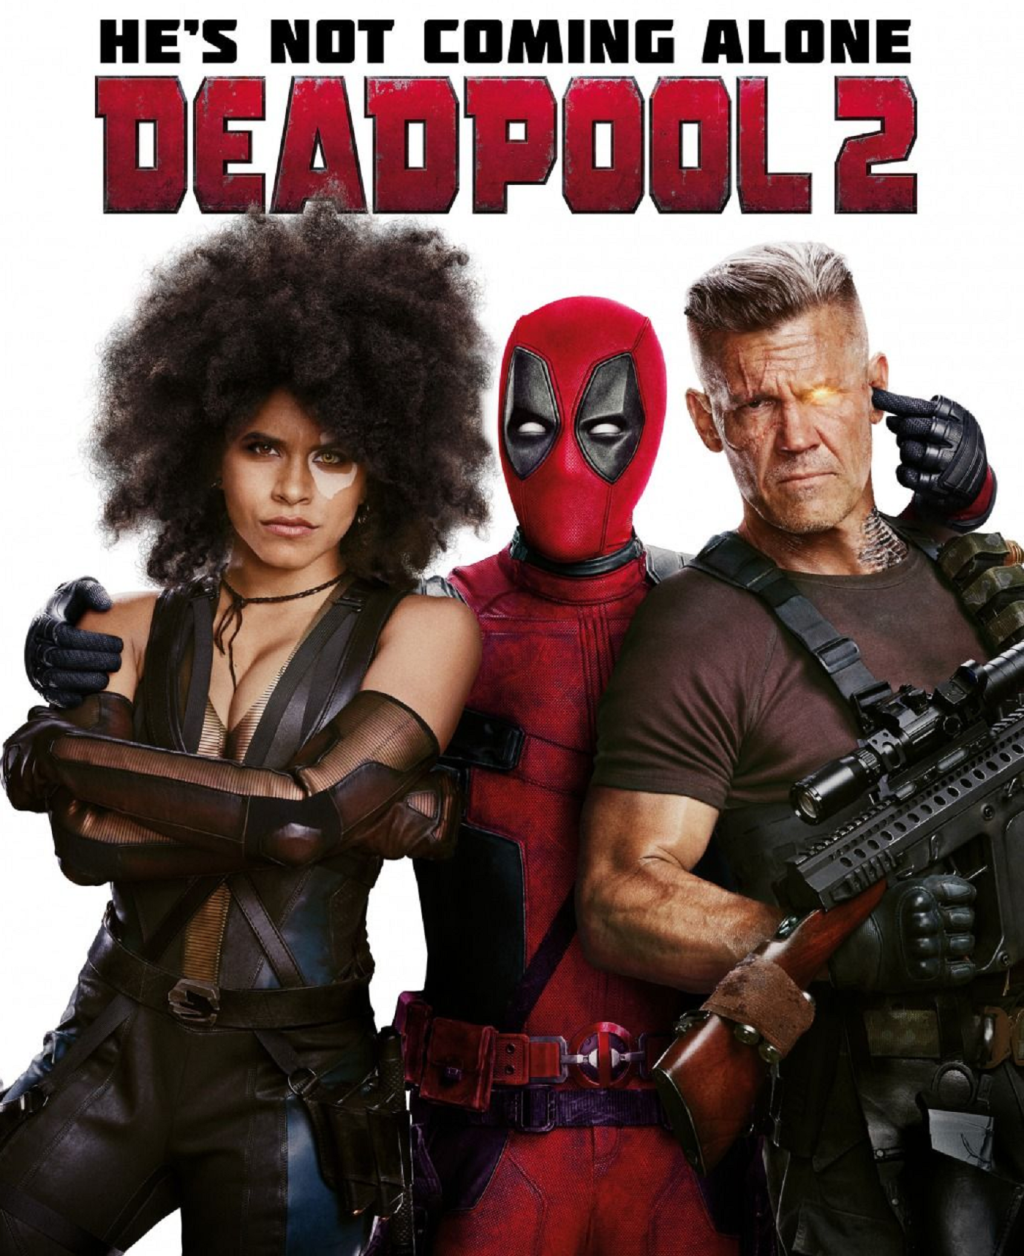 Deadpool 2 (2018) - Phil Catterall joins Tim Worthington for a chat about Wade Wilson leading the newly formed X-Force straight into some overhead power lines in It's Good, Except It Sucks - a movie by movie – and television series by television series – hurtle through the Marvel Cinematic Universe.